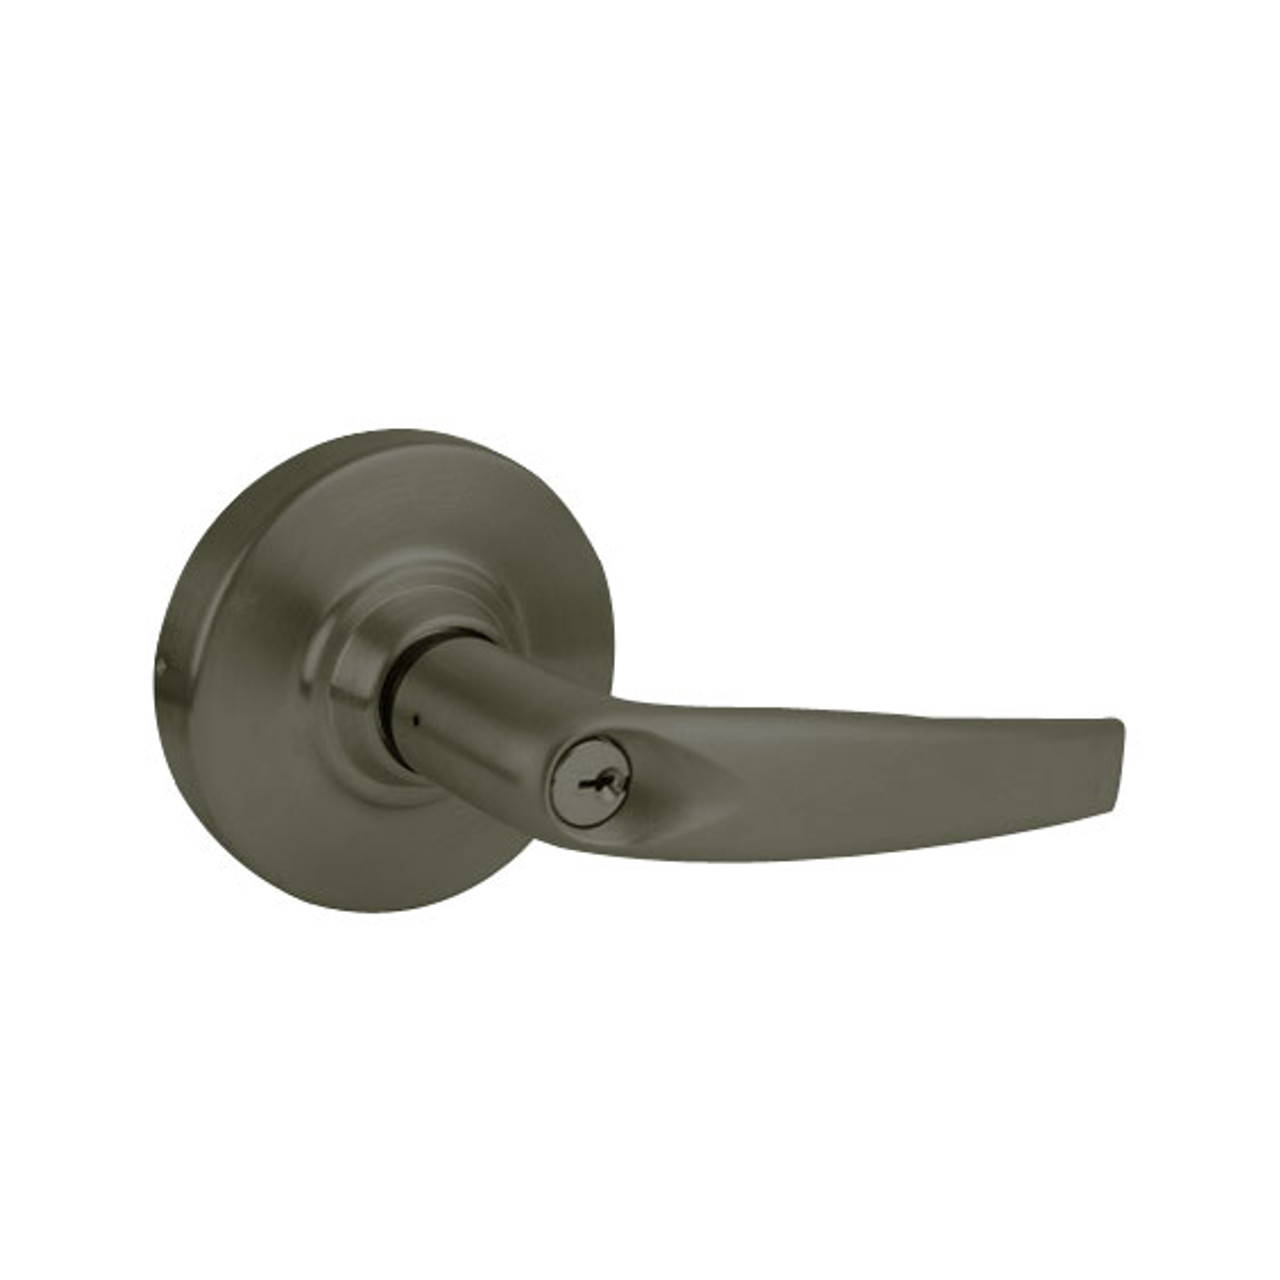 ND85PD-ATH-613 Schlage Athens Cylindrical Lock in Oil Rubbed Bronze